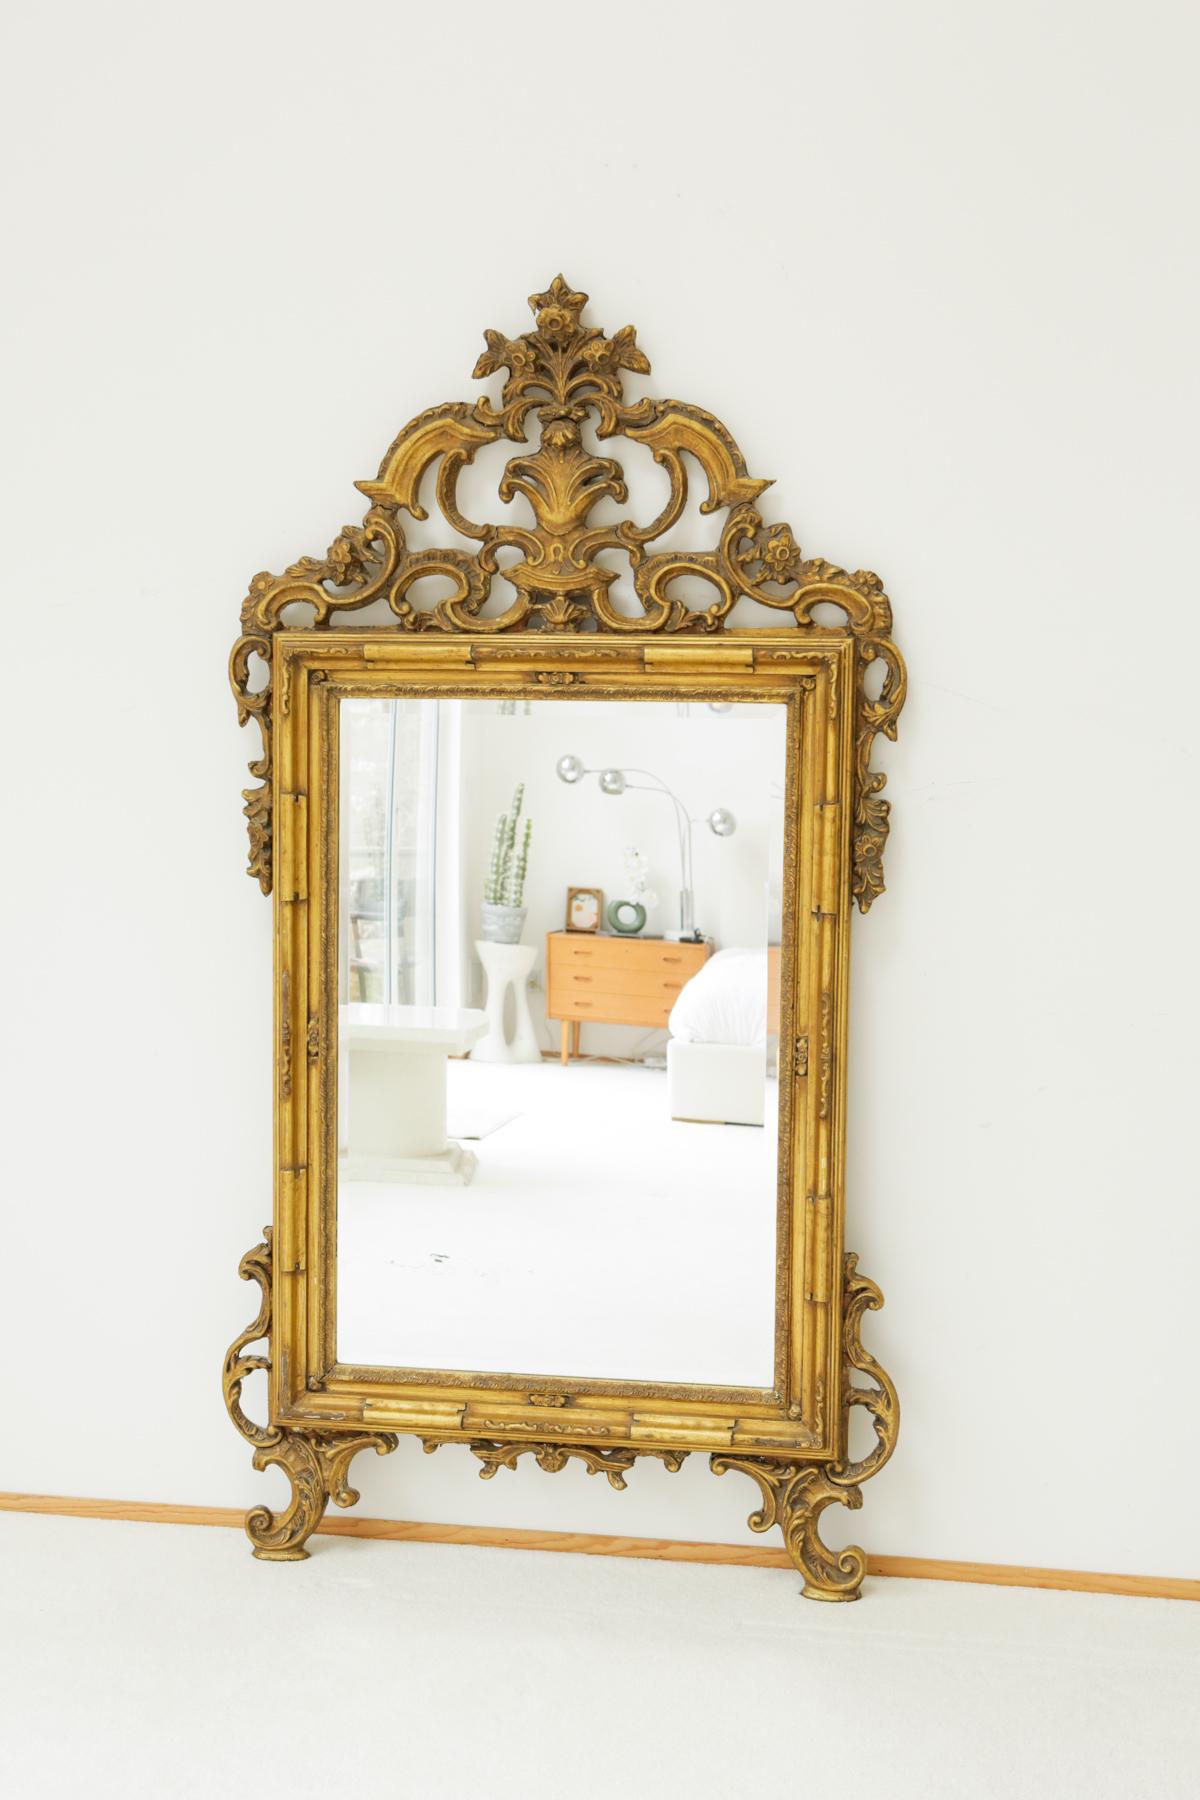 A vintage Louis XVI style mirror created from giltwood, fit for royalty. This grand and uniquely shaped mirror features elaborate carvings of various floral and foliate motifs. There is an emphasis on visual lightness and harmony, much of its